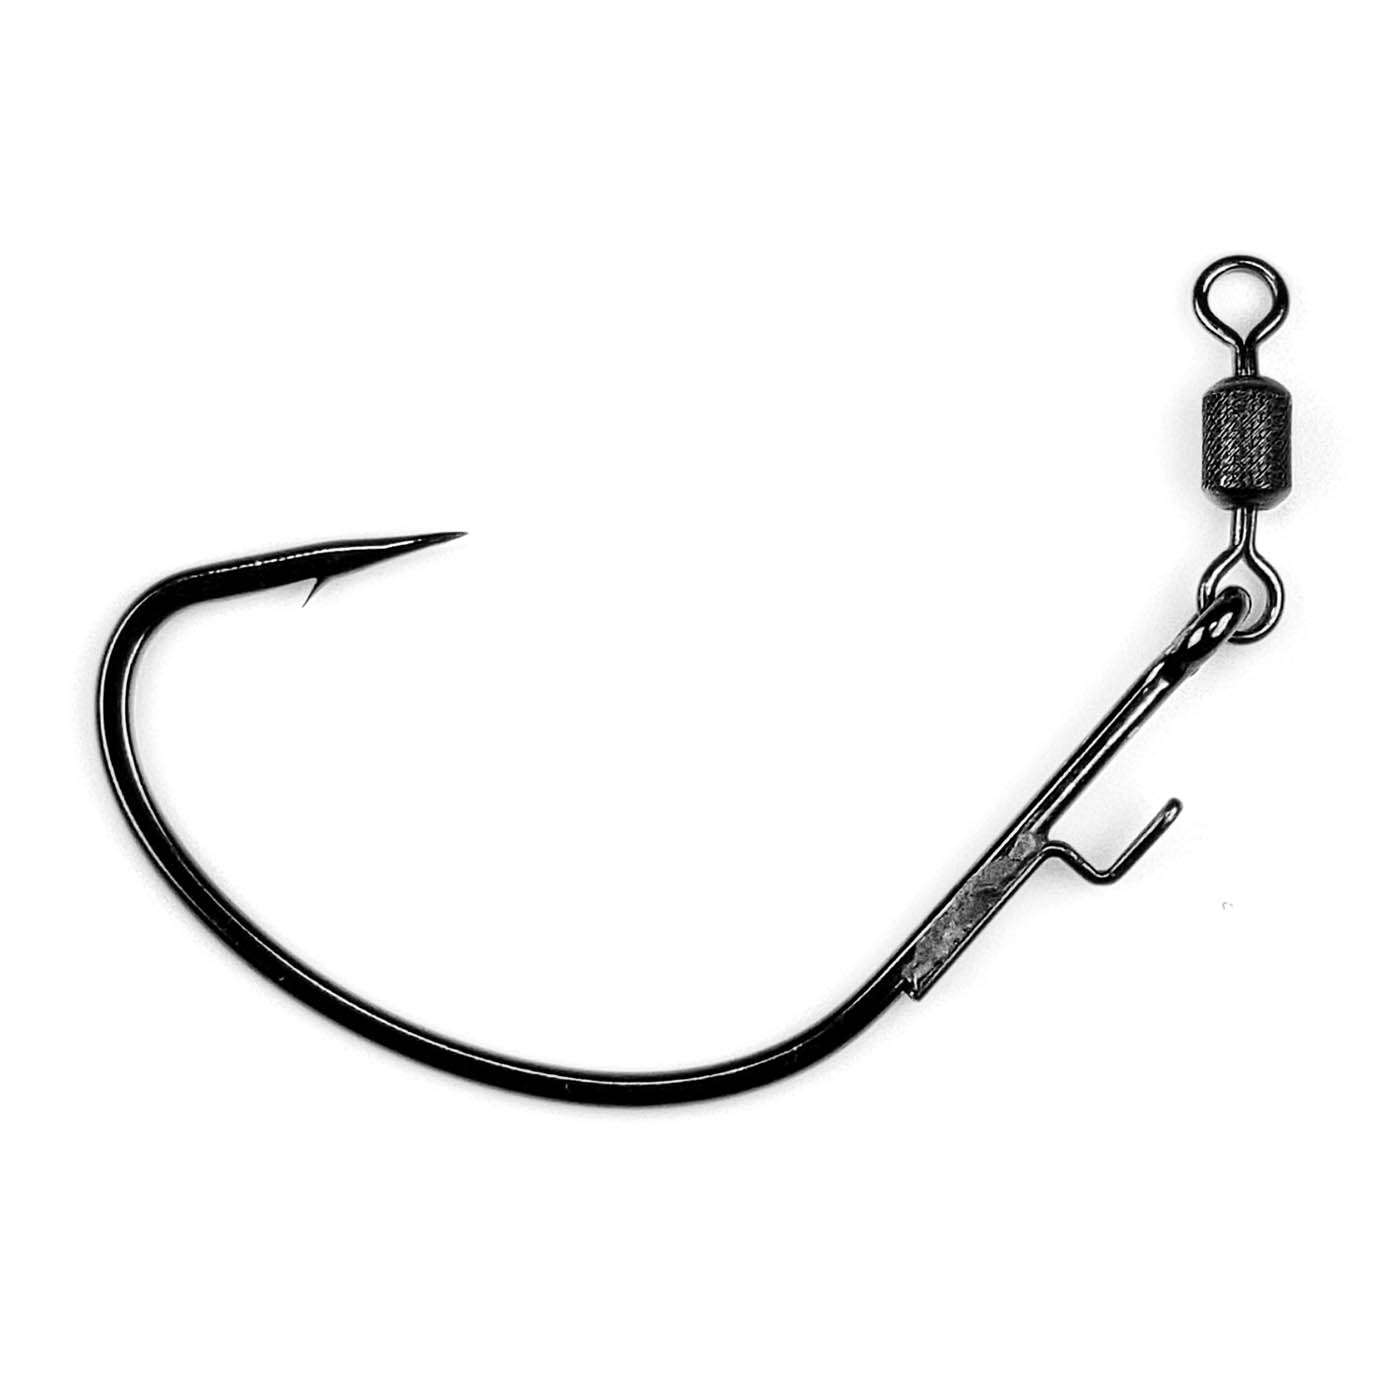 <p><strong>Gamakatsu G-Finesse Cover Neko</strong></p><p>The Cover Neko Hook consists of a shiner-style straight eye hook with an attached swivel to prevent line twist. Thereâs also a strong, 90-degree wire keeper to lock plastics in place. Taken together, itâs a tool that will let anglers easily fish through brush, laydowns and grass while maximizing hook-up percentages. $8.80. <a href=